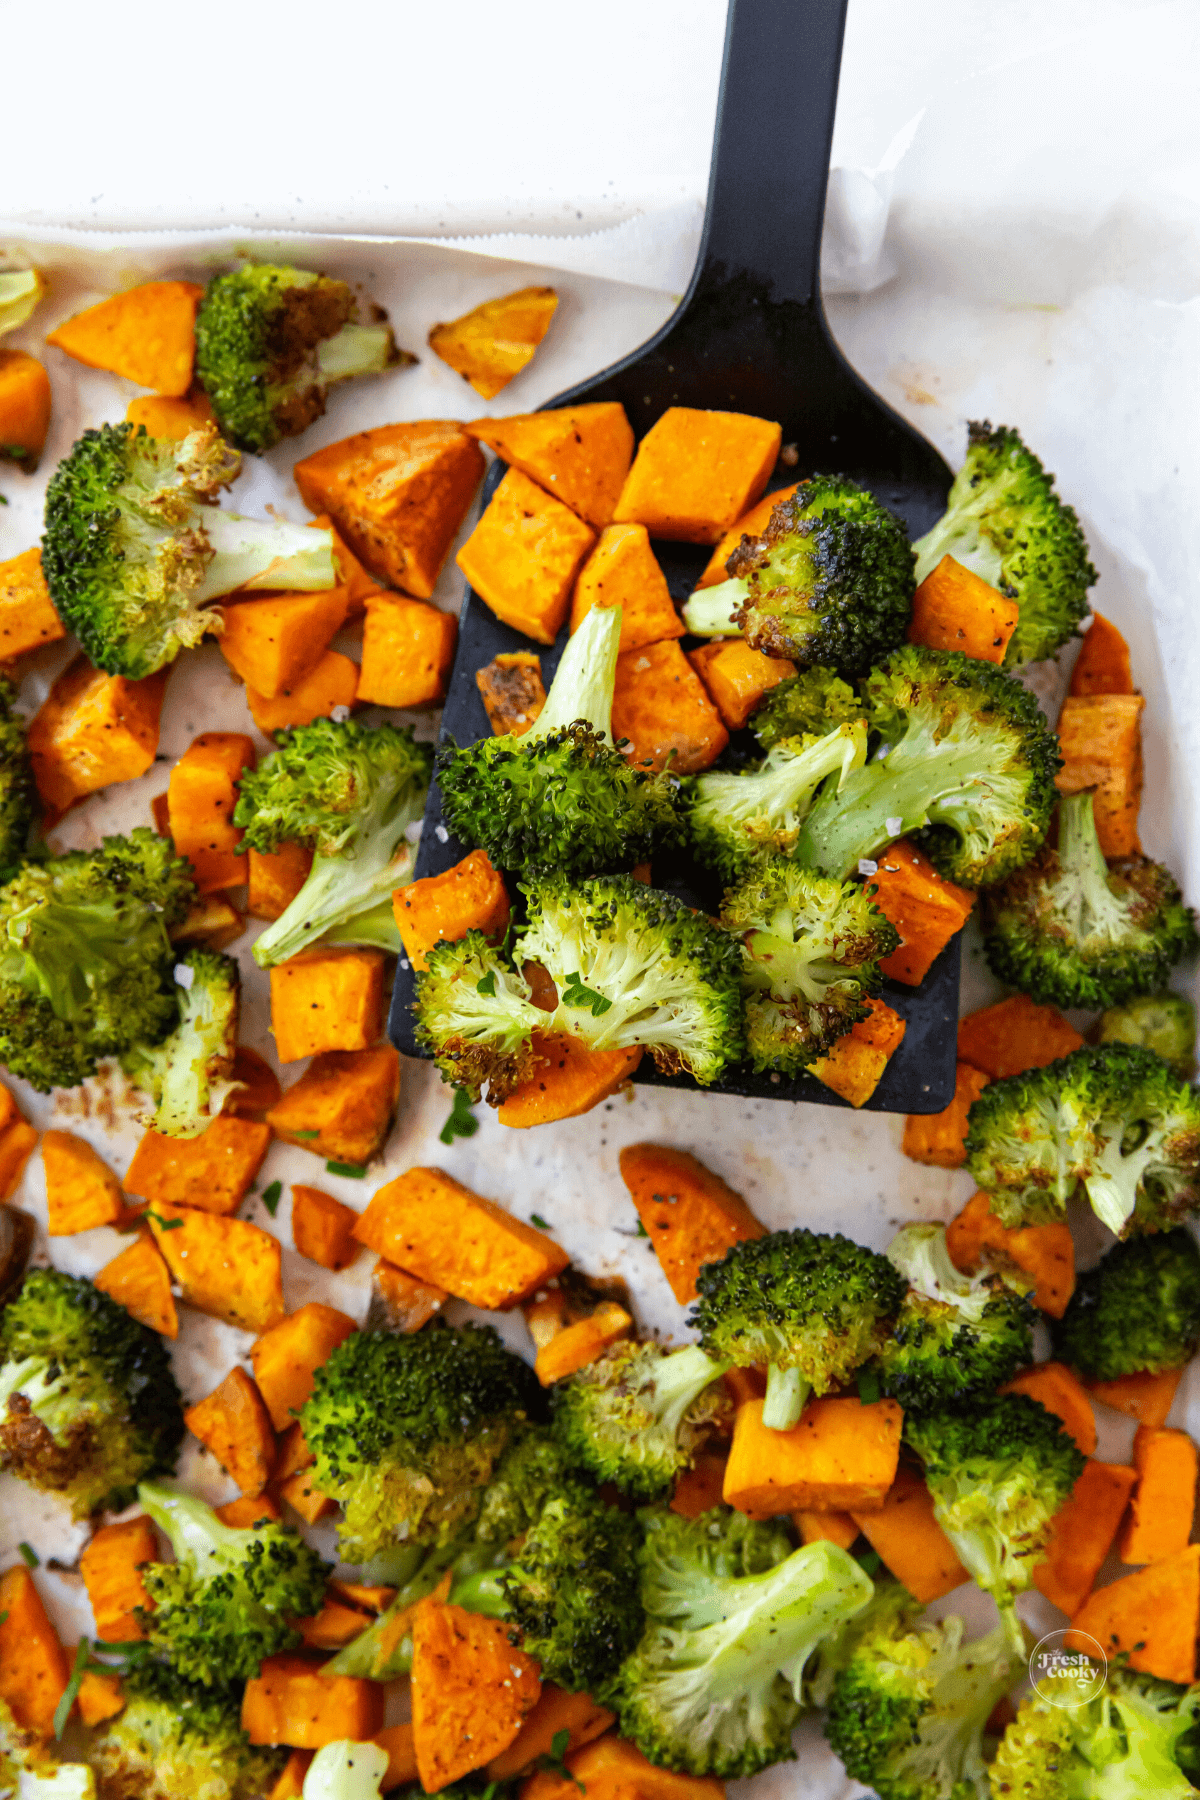 Roasted sweet potatoes and broccoli on sheet pan with spatula.